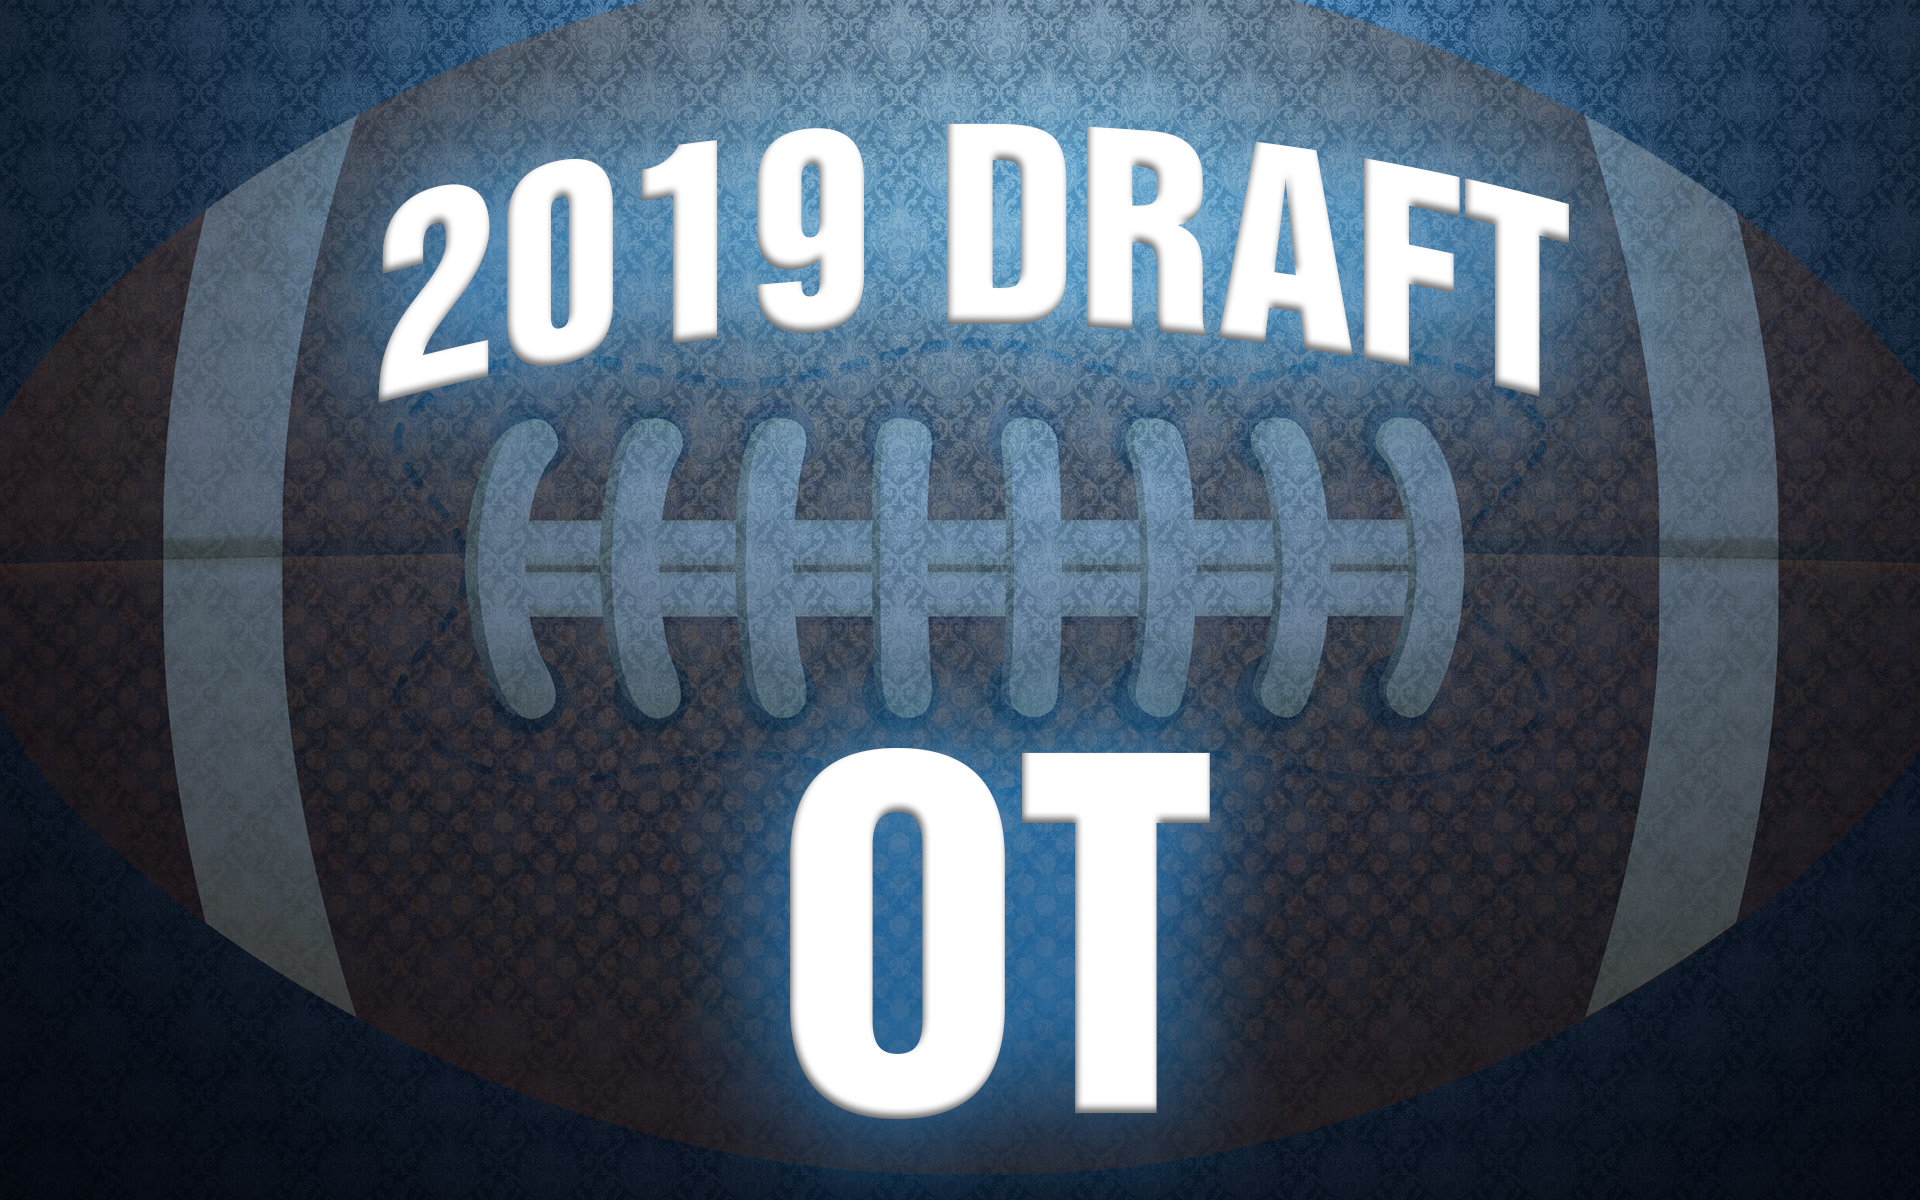 NFL Draft offensive tackle rankings 2019